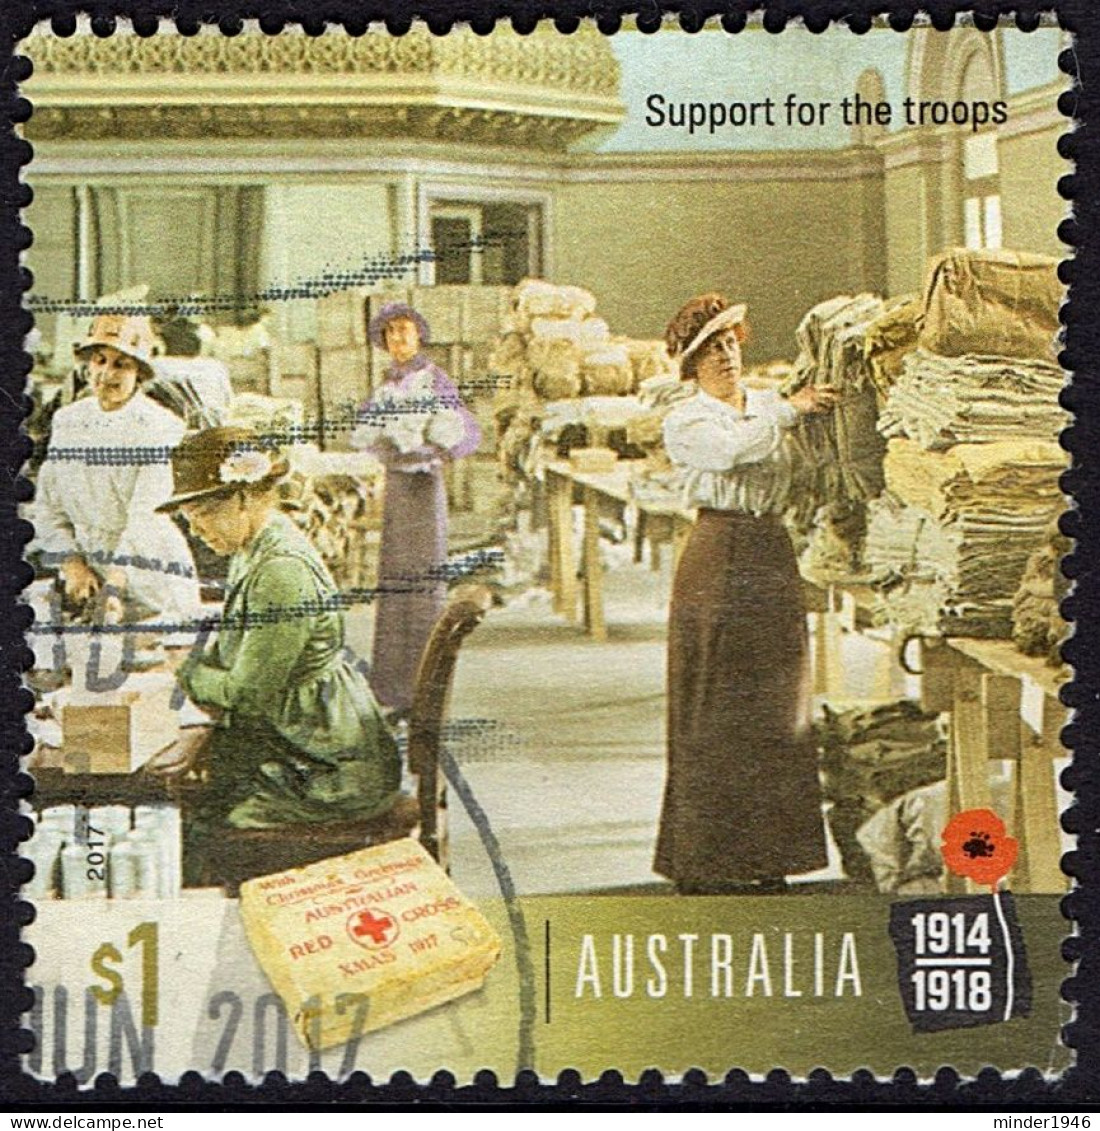 AUSTRALIA 2017 $1 Multicoloured, Centenary Of WWI 1917-Support For The Troops Used - Oblitérés